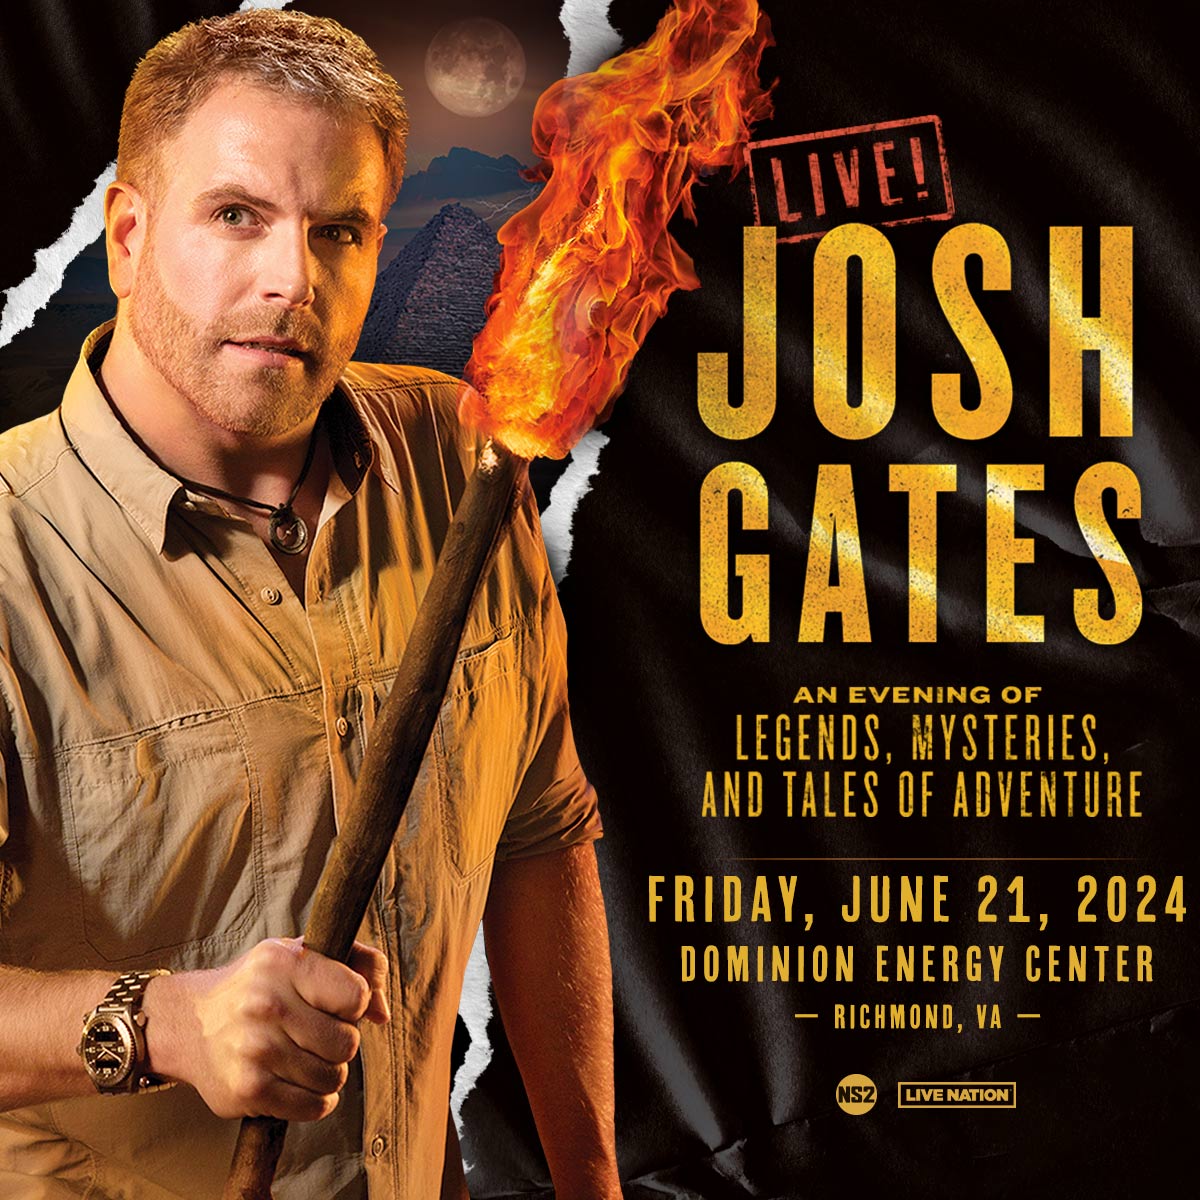 DISCOVERY CHANNEL’S JOSH GATES BRINGS LIVE SHOW TO RICHMOND